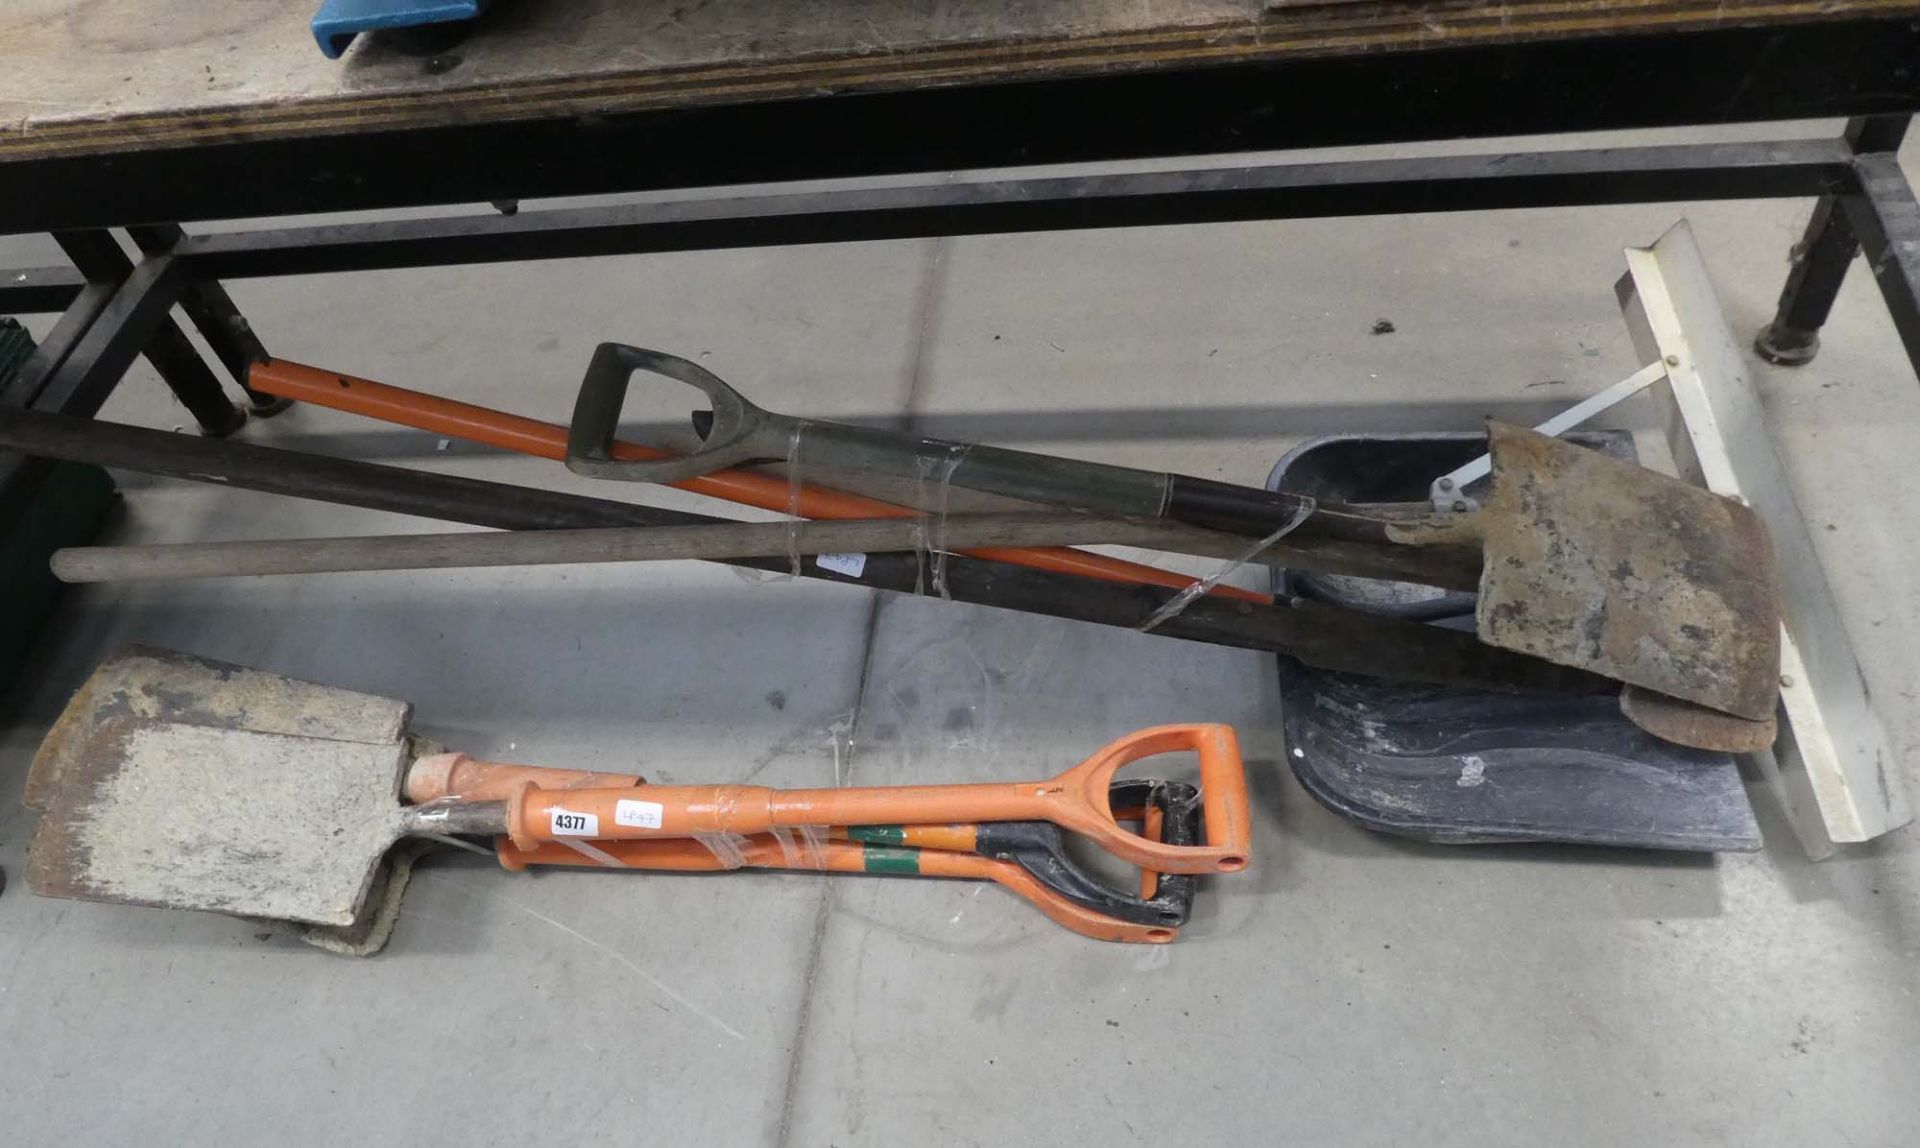 2 bundles of assorted tools incl. heavy duty trenching spade, shovels, loppers, and rakes